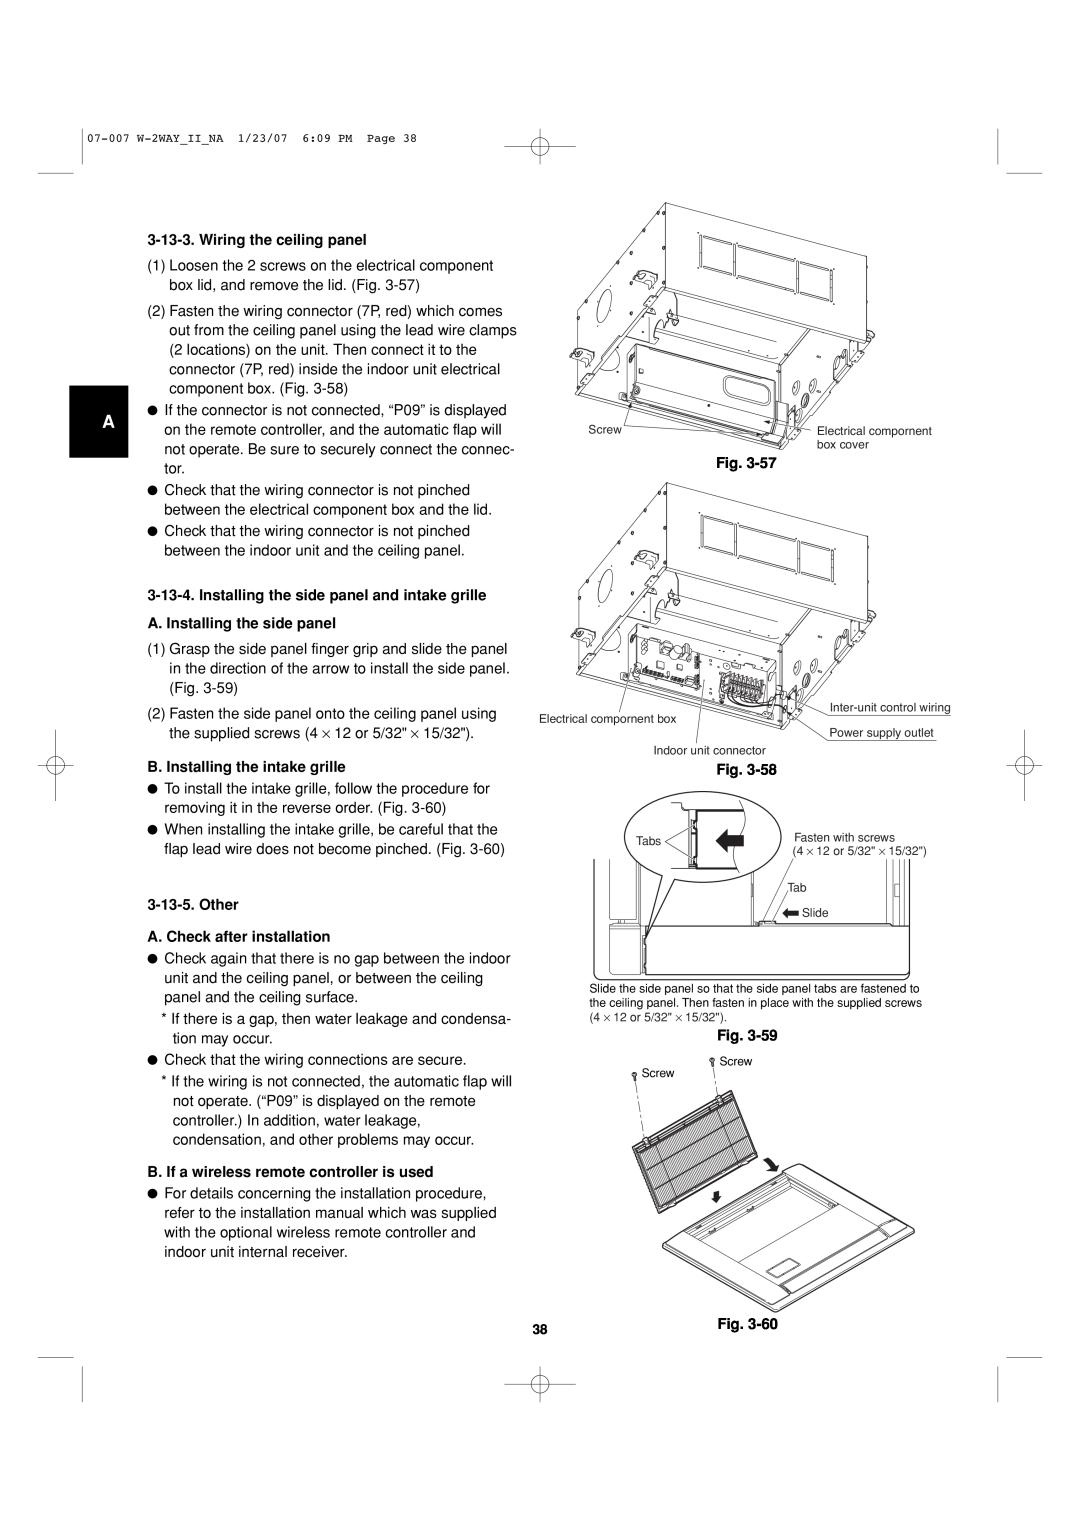 Sanyo 85464359982001 Wiring the ceiling panel, A. Installing the side panel, B. Installing the intake grille, Fig 